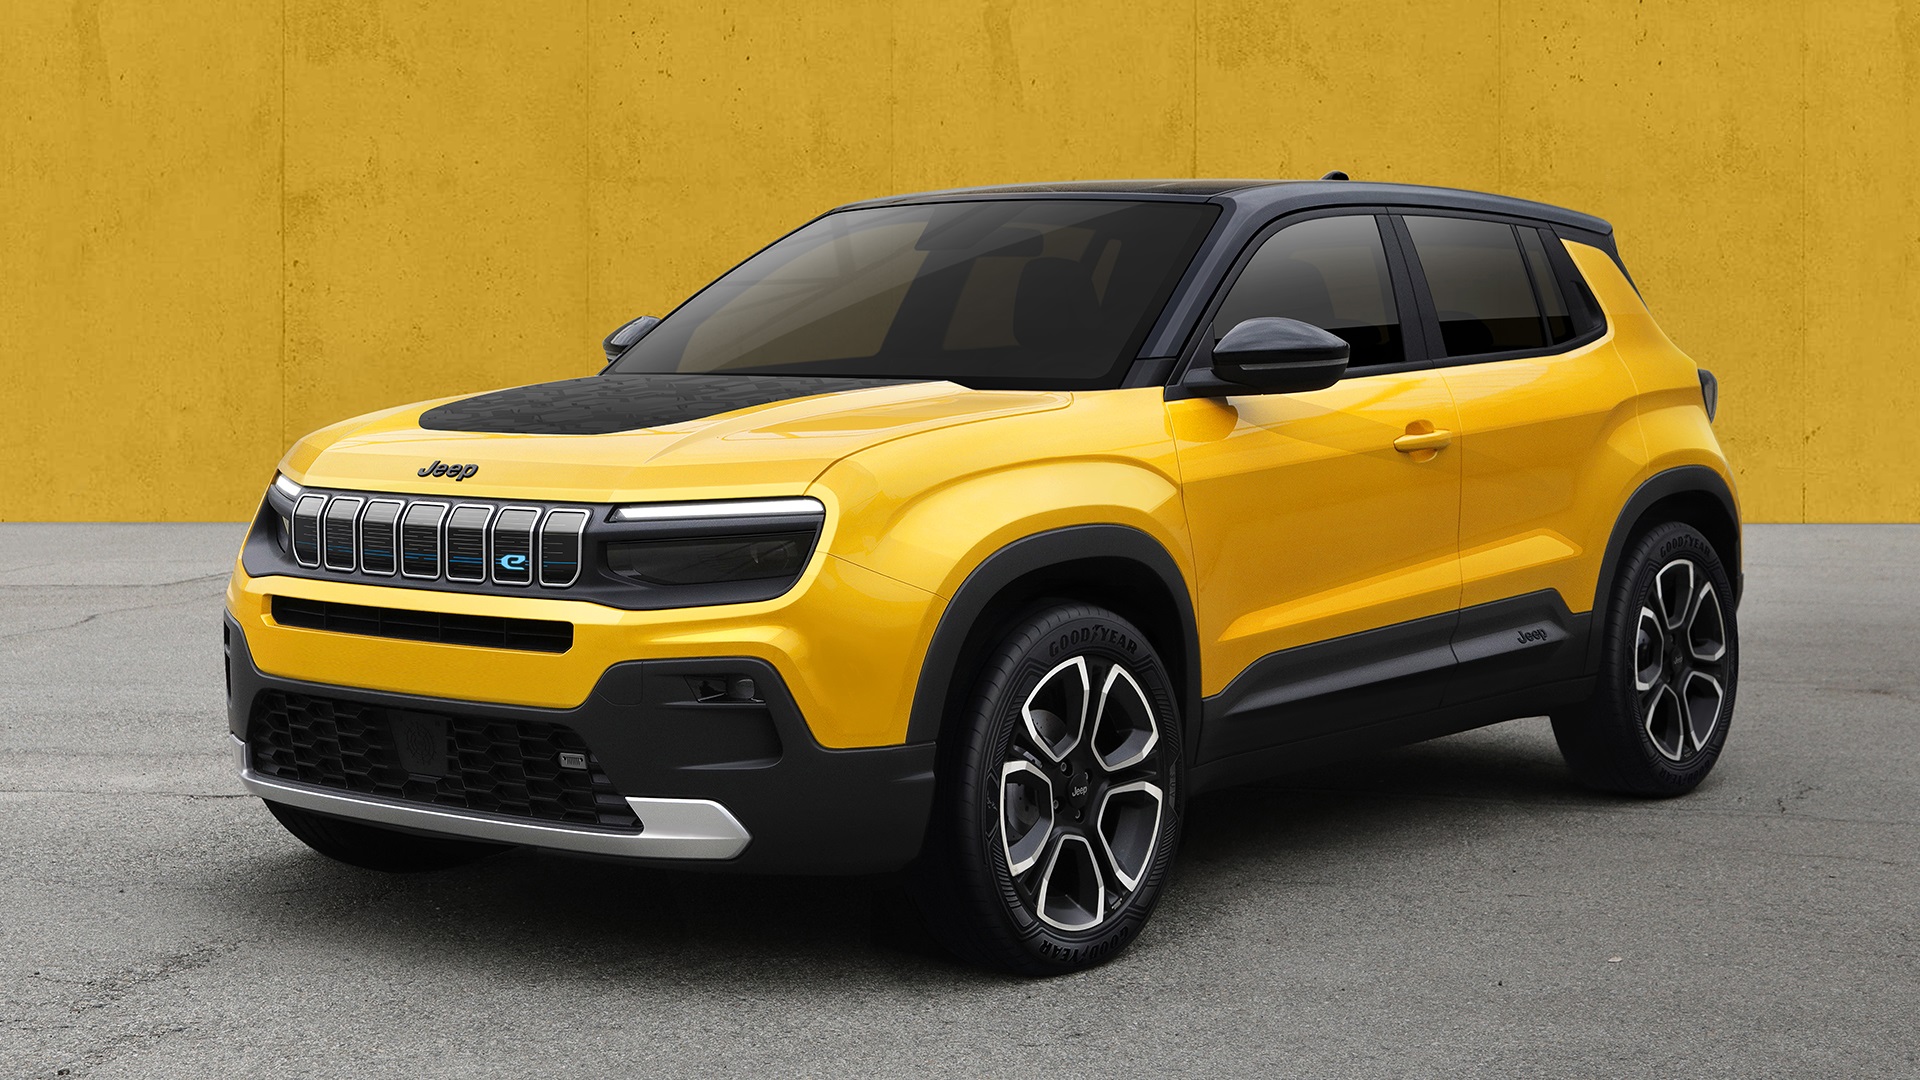 Jeep’s First Fully Electric SUV Revealed